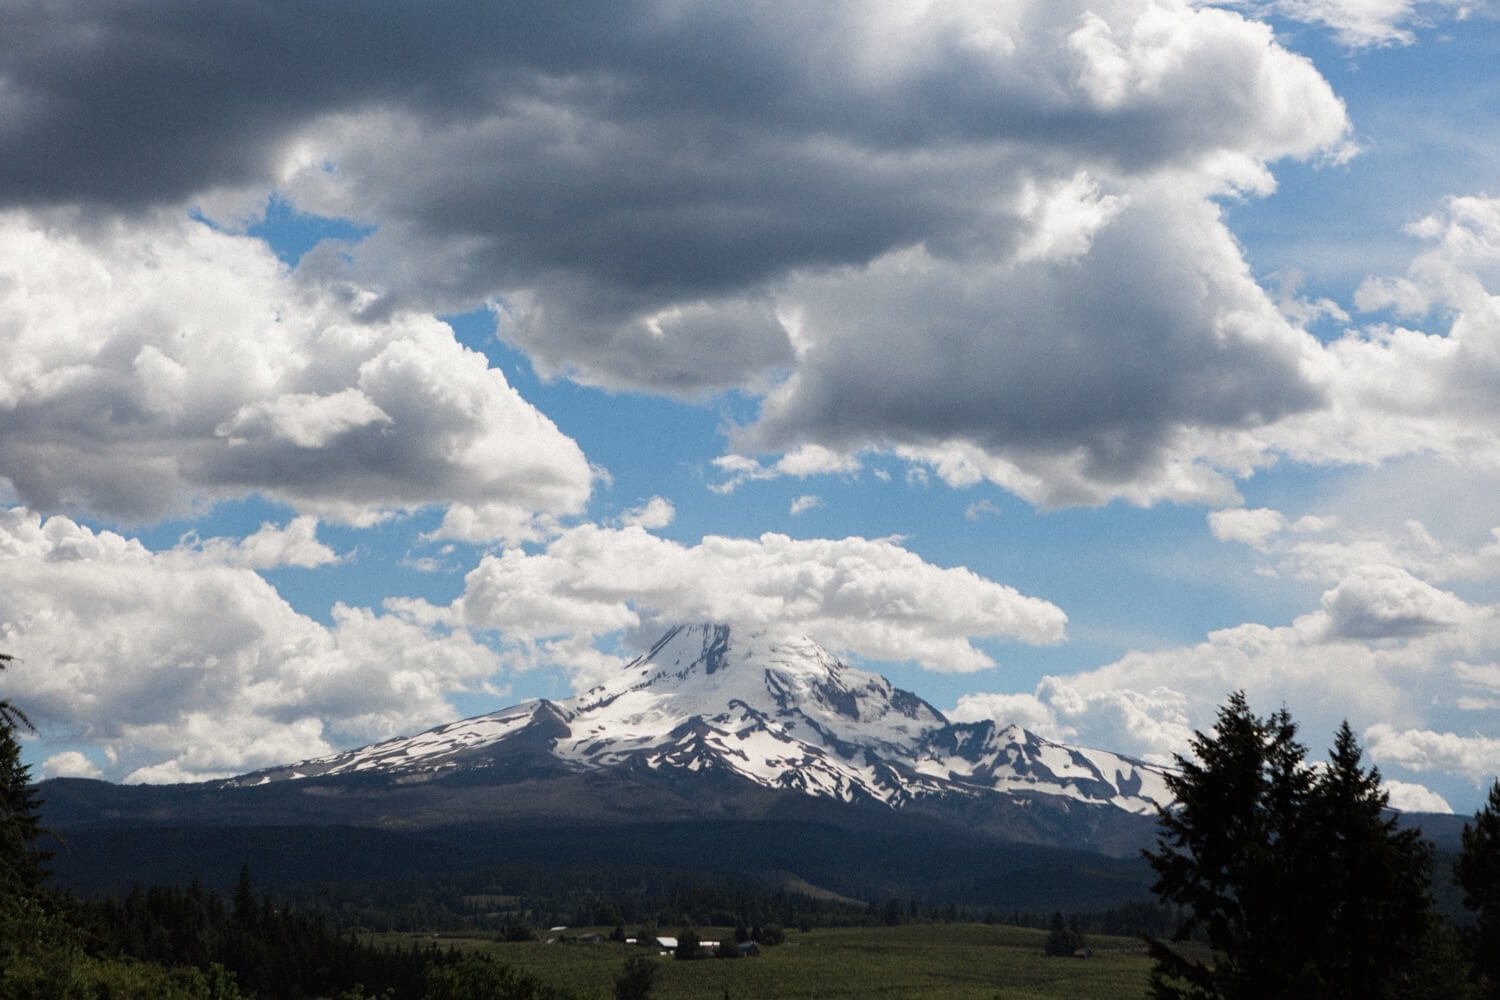 092_Mount Hood Organic Farms Wedding-Mount hood surrounded by white clouds.jpg